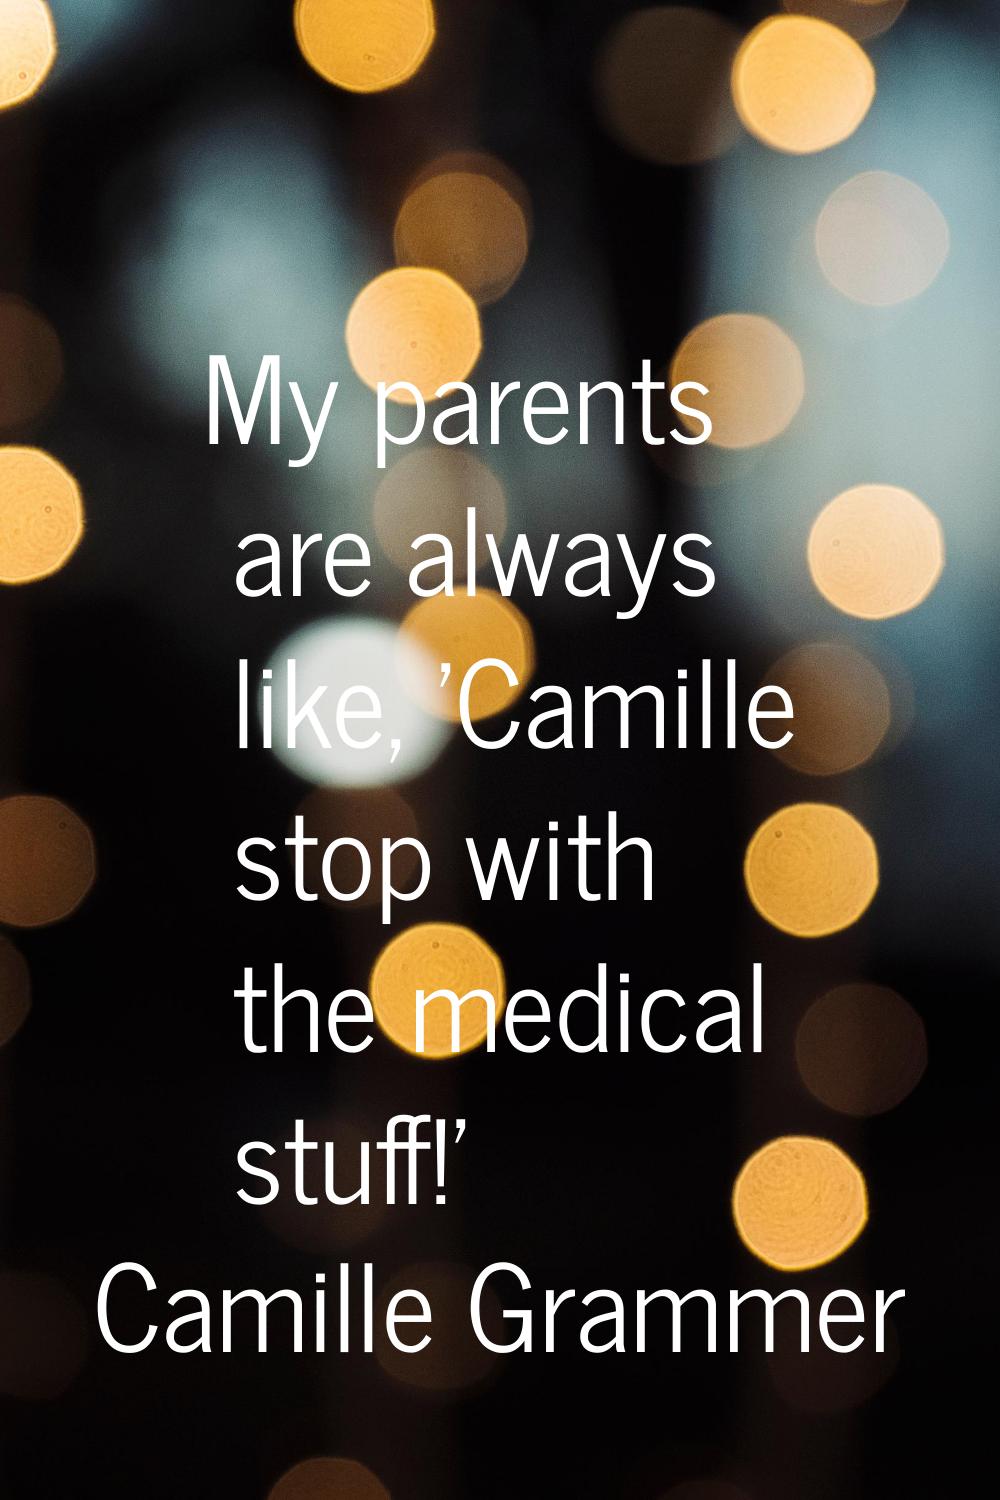 My parents are always like, 'Camille stop with the medical stuff!'